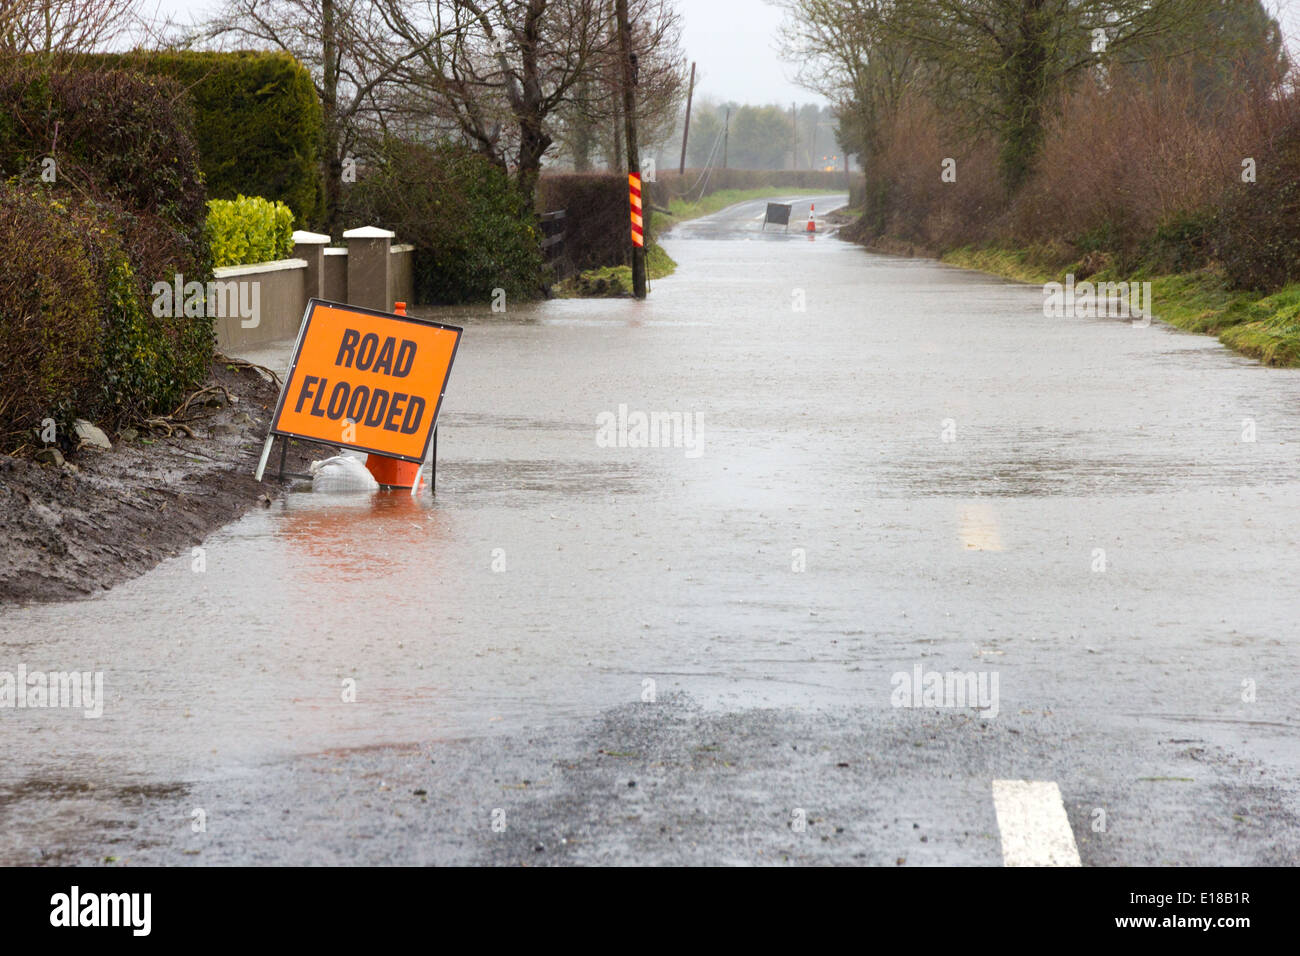 Road flooded in Ireland Stock Photo